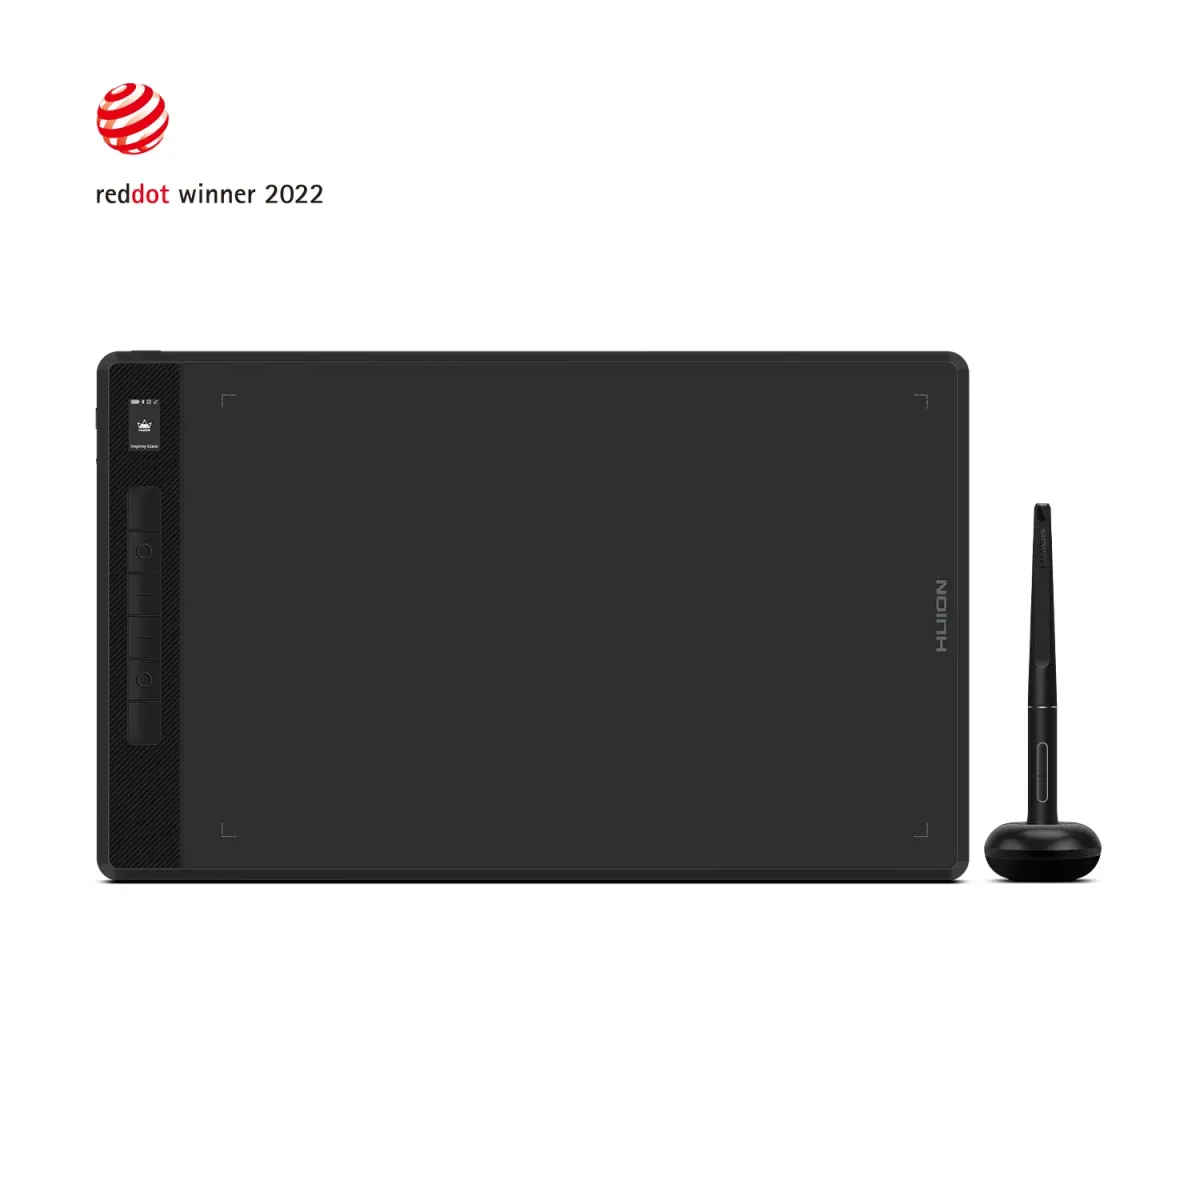 https://store-img.huion.com/e/490/huion-inspiroy-giano-g930l-pen-tablet-1.webp?x-oss-process=image/resize,m_lfit,w_1200